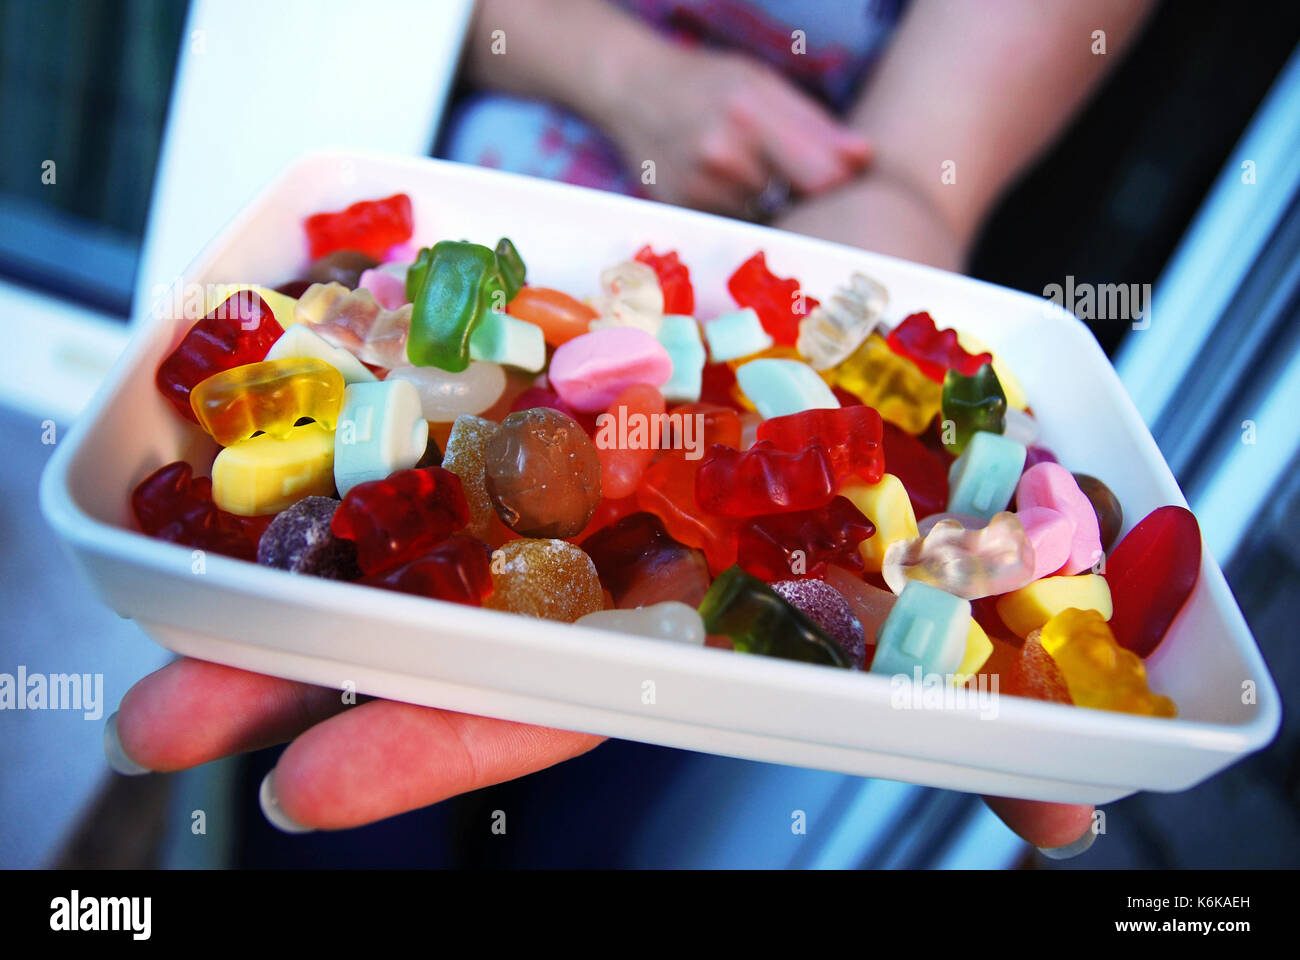 Bowl of gummy bears and other sweets (candy) Stock Photo